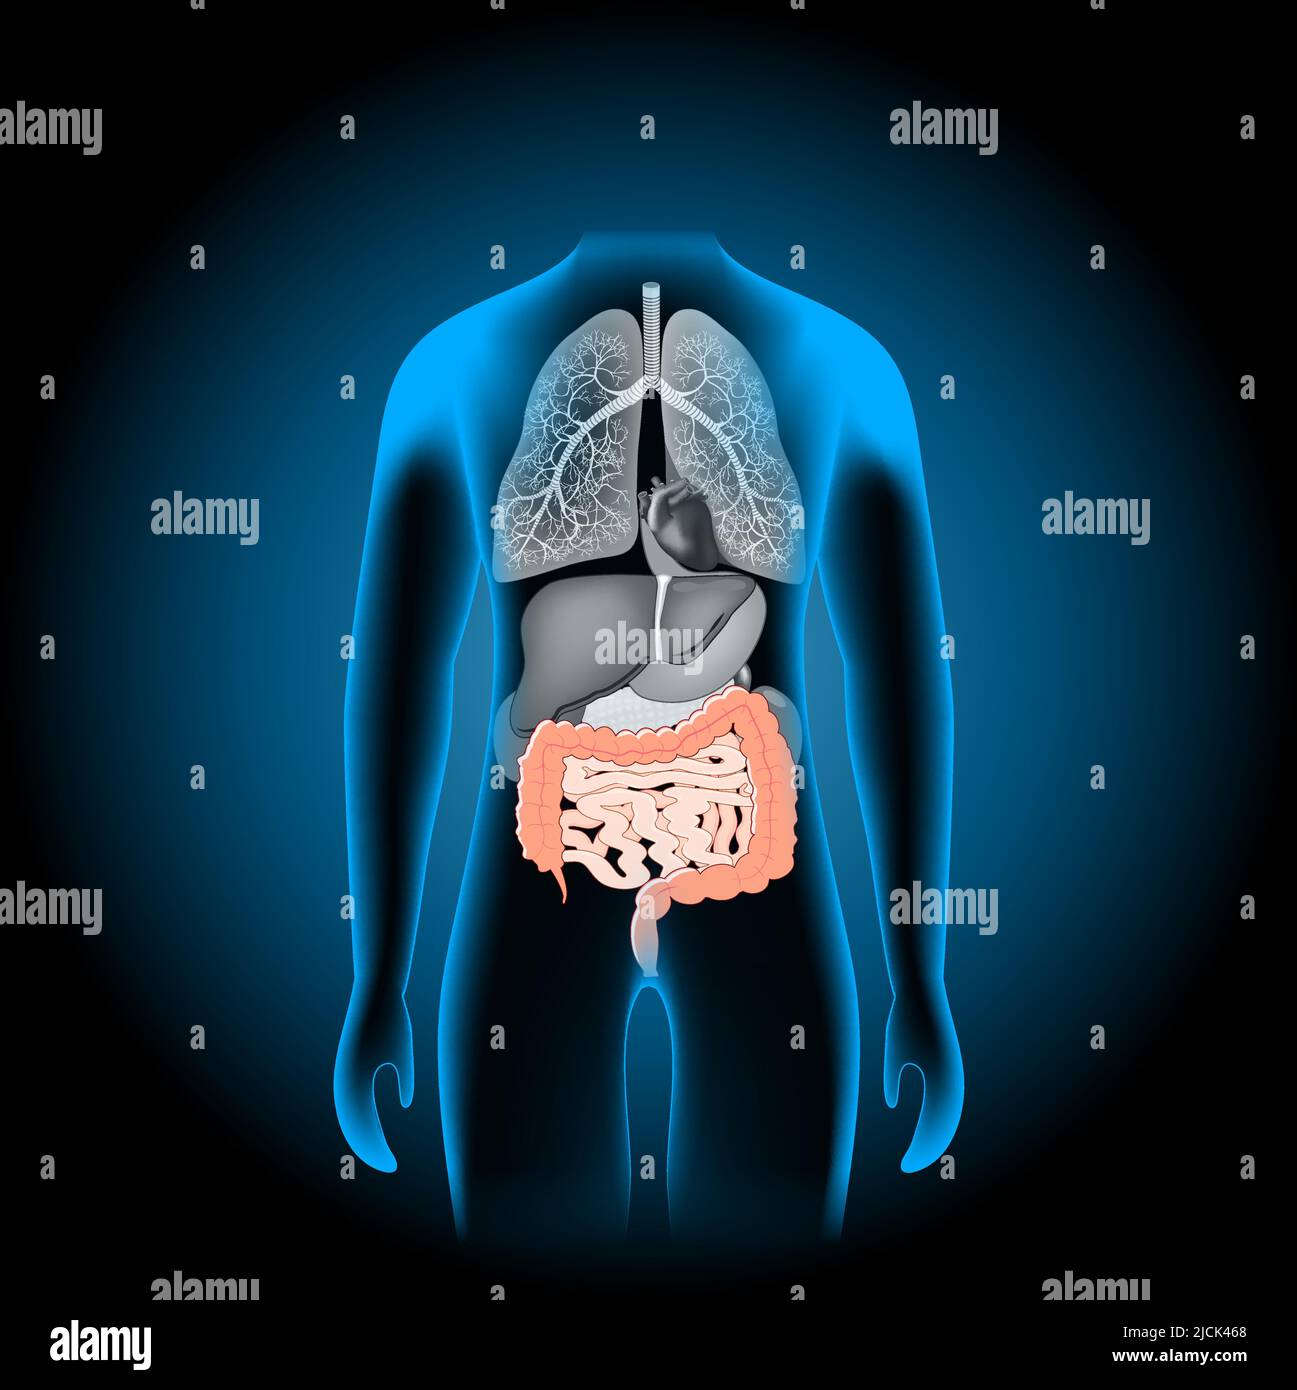 Human body anatomy. Gastrointestinal tract. Digestive system and Internal organs.  Diagram of stomach, intestines and rectum. x-ray blue realistic Stock Vector